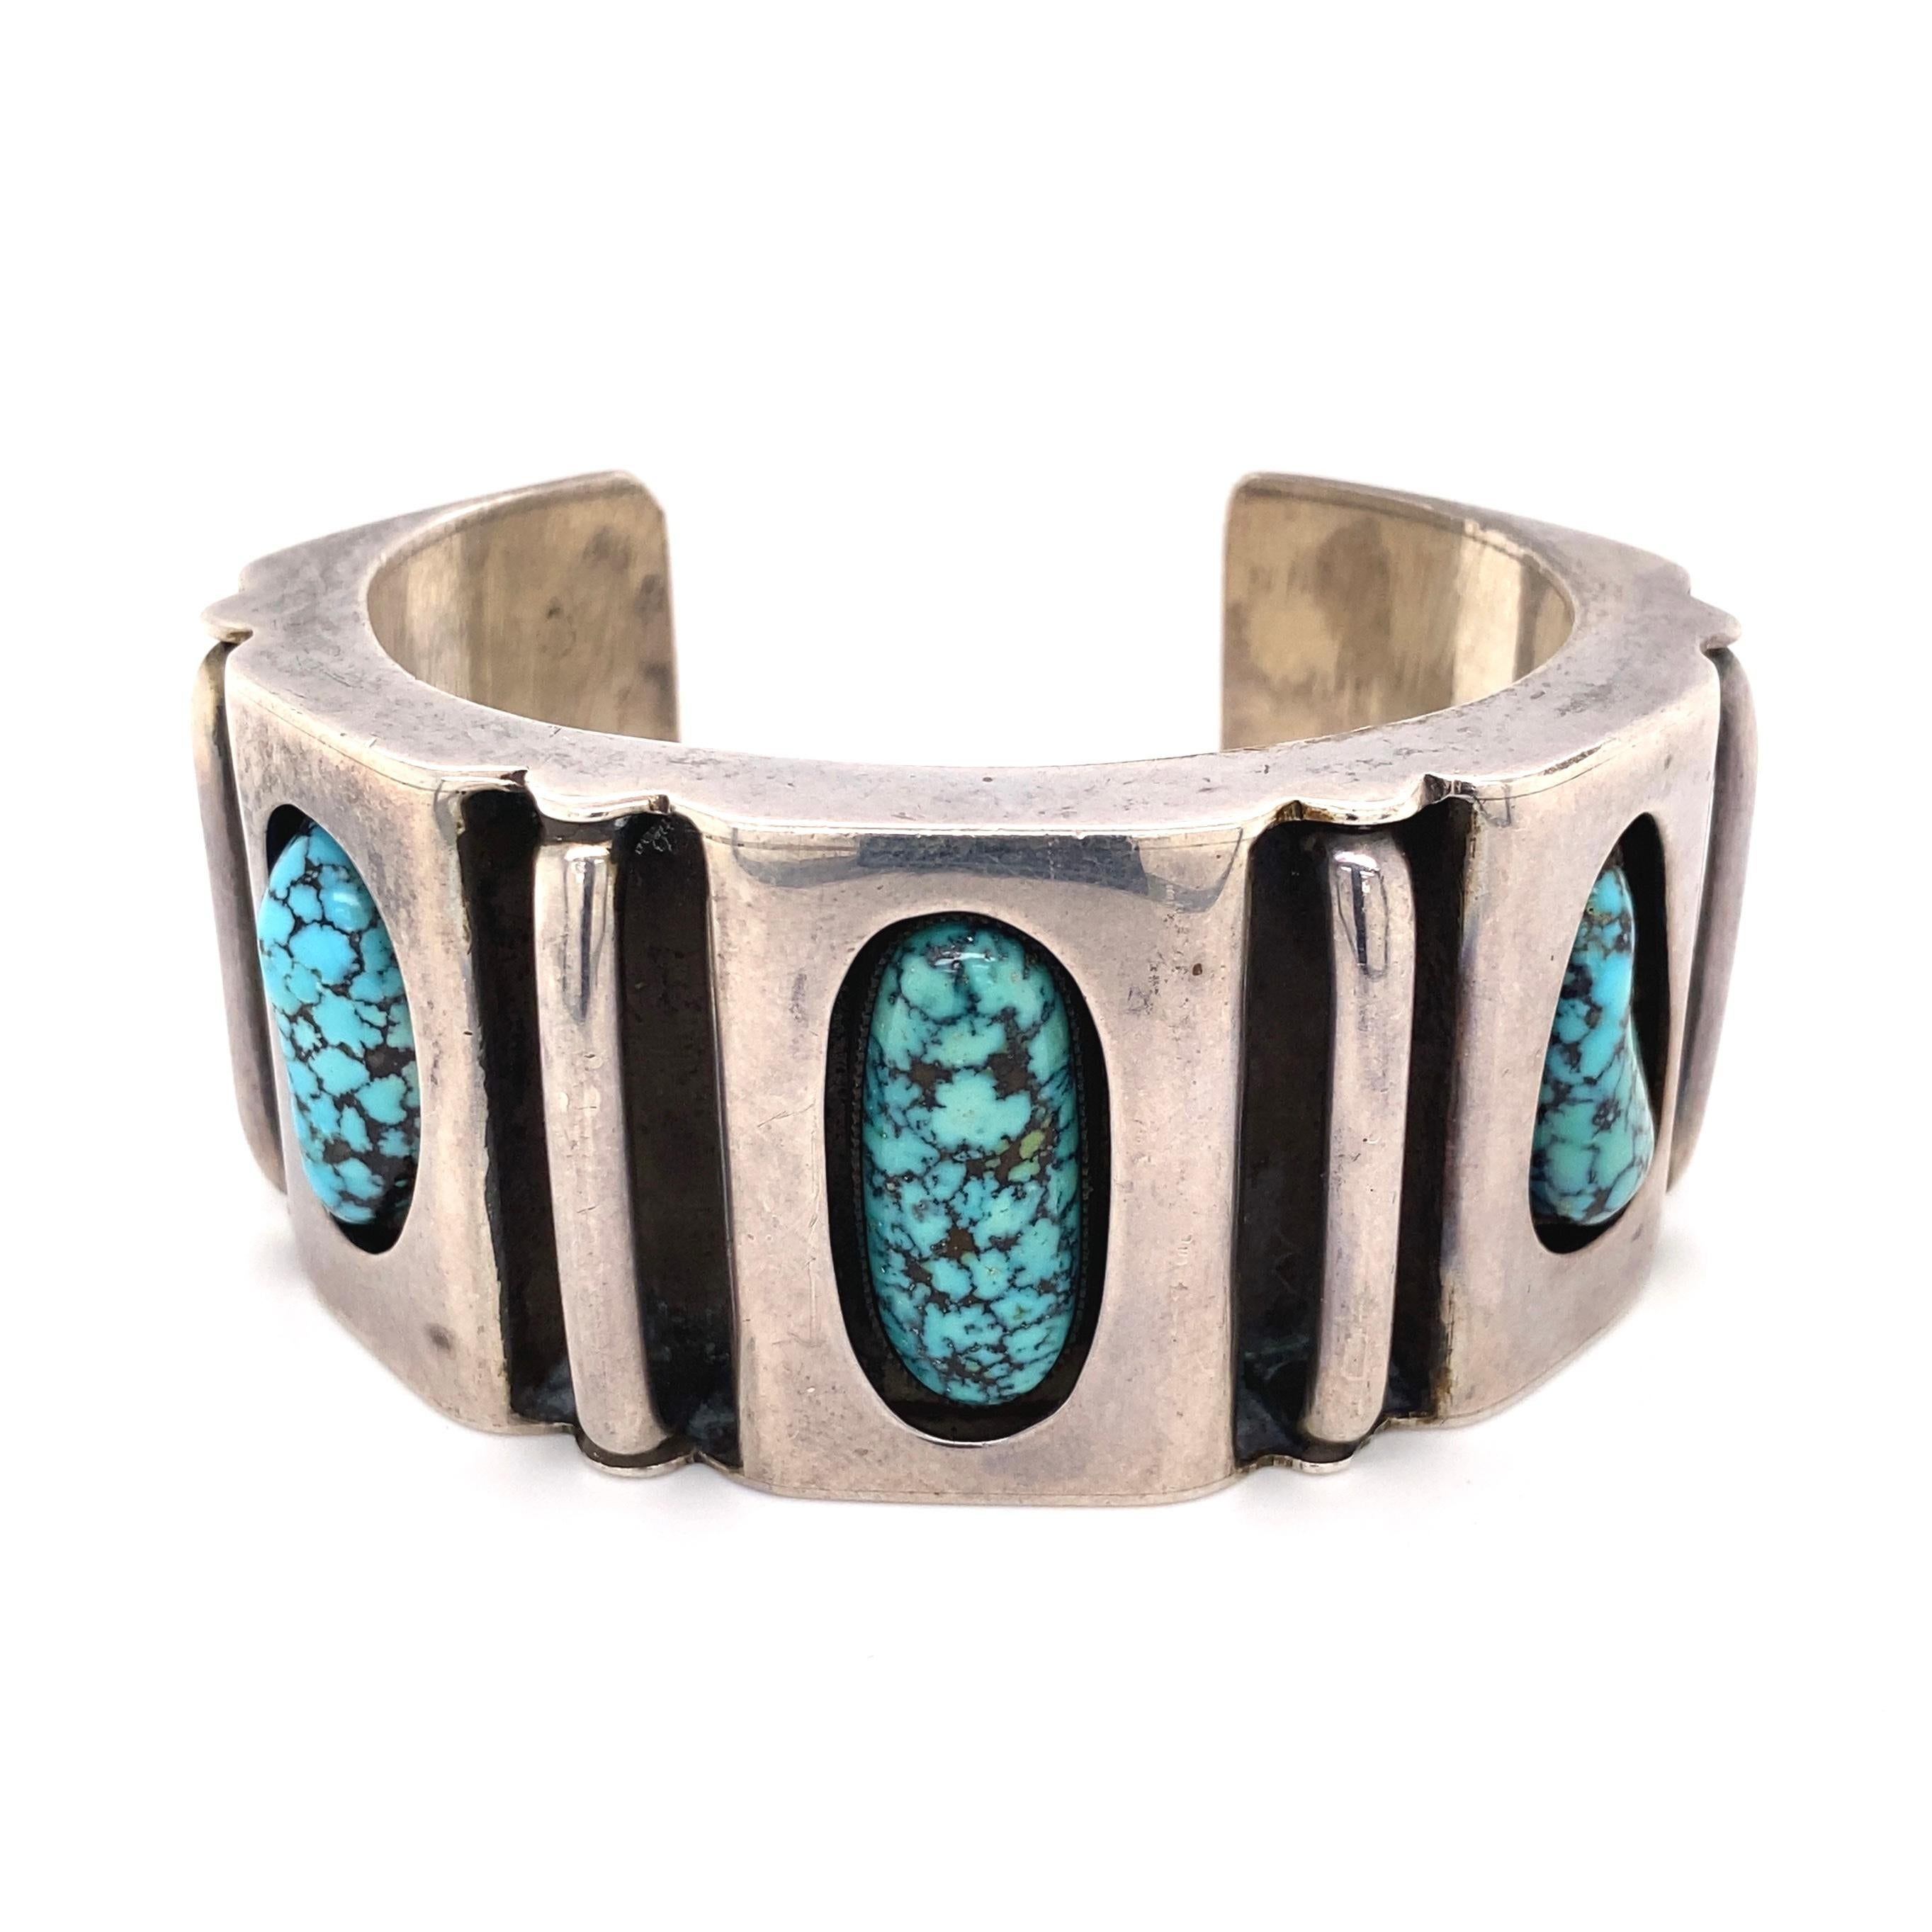 Native American Original Navajo Sterling Silver Genuine Spider Web Turquoise Cuff Bracelet. Hand set with 3 oval Turquoise stones in shadowbox design. Hand crafted Sterling Silver 925; beautifully detailed engraving mounting. More wonderful in real